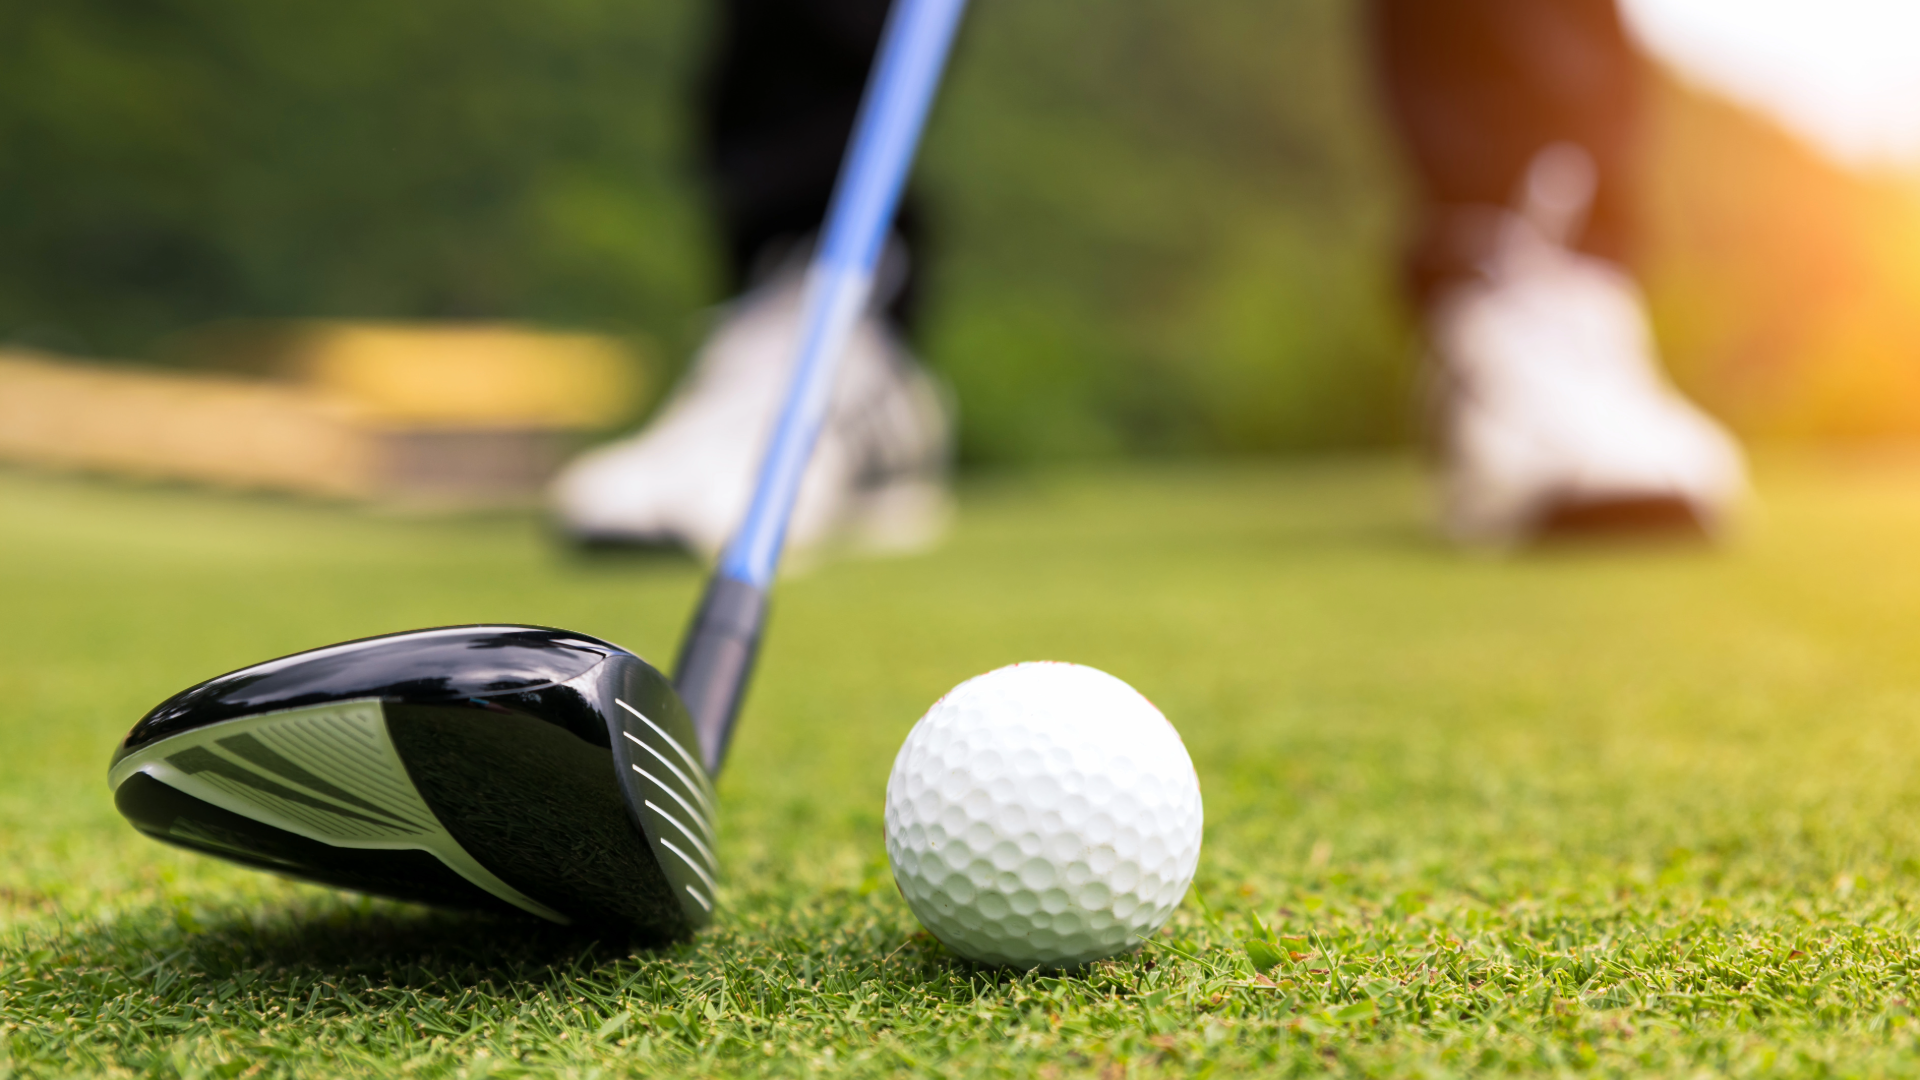 Close up of a golfer teeing up, blurred out foot placement in the background